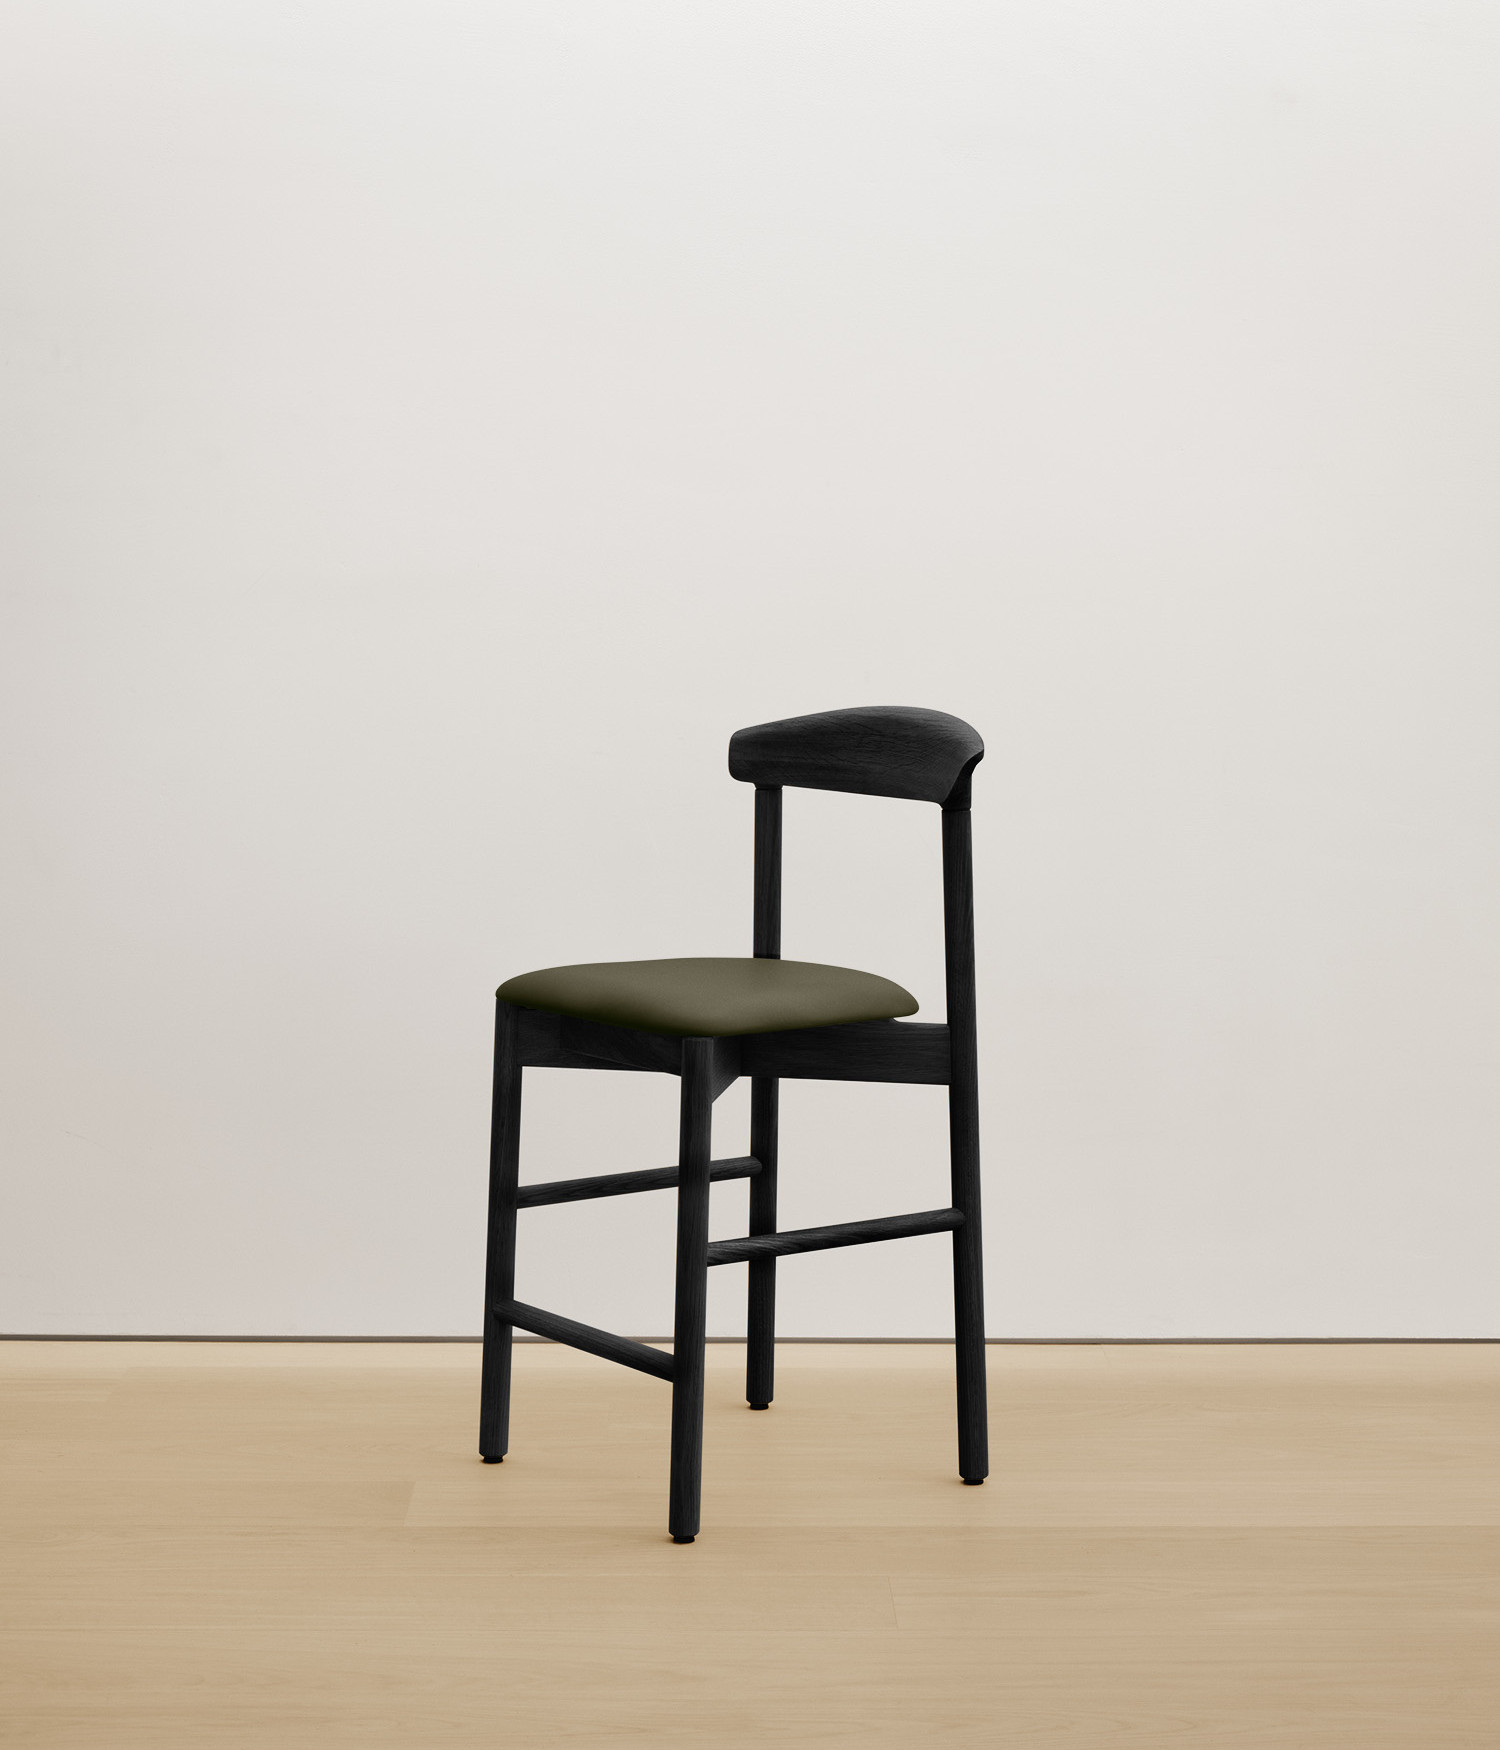  black-stained-oak stool with forest color upholstered seat